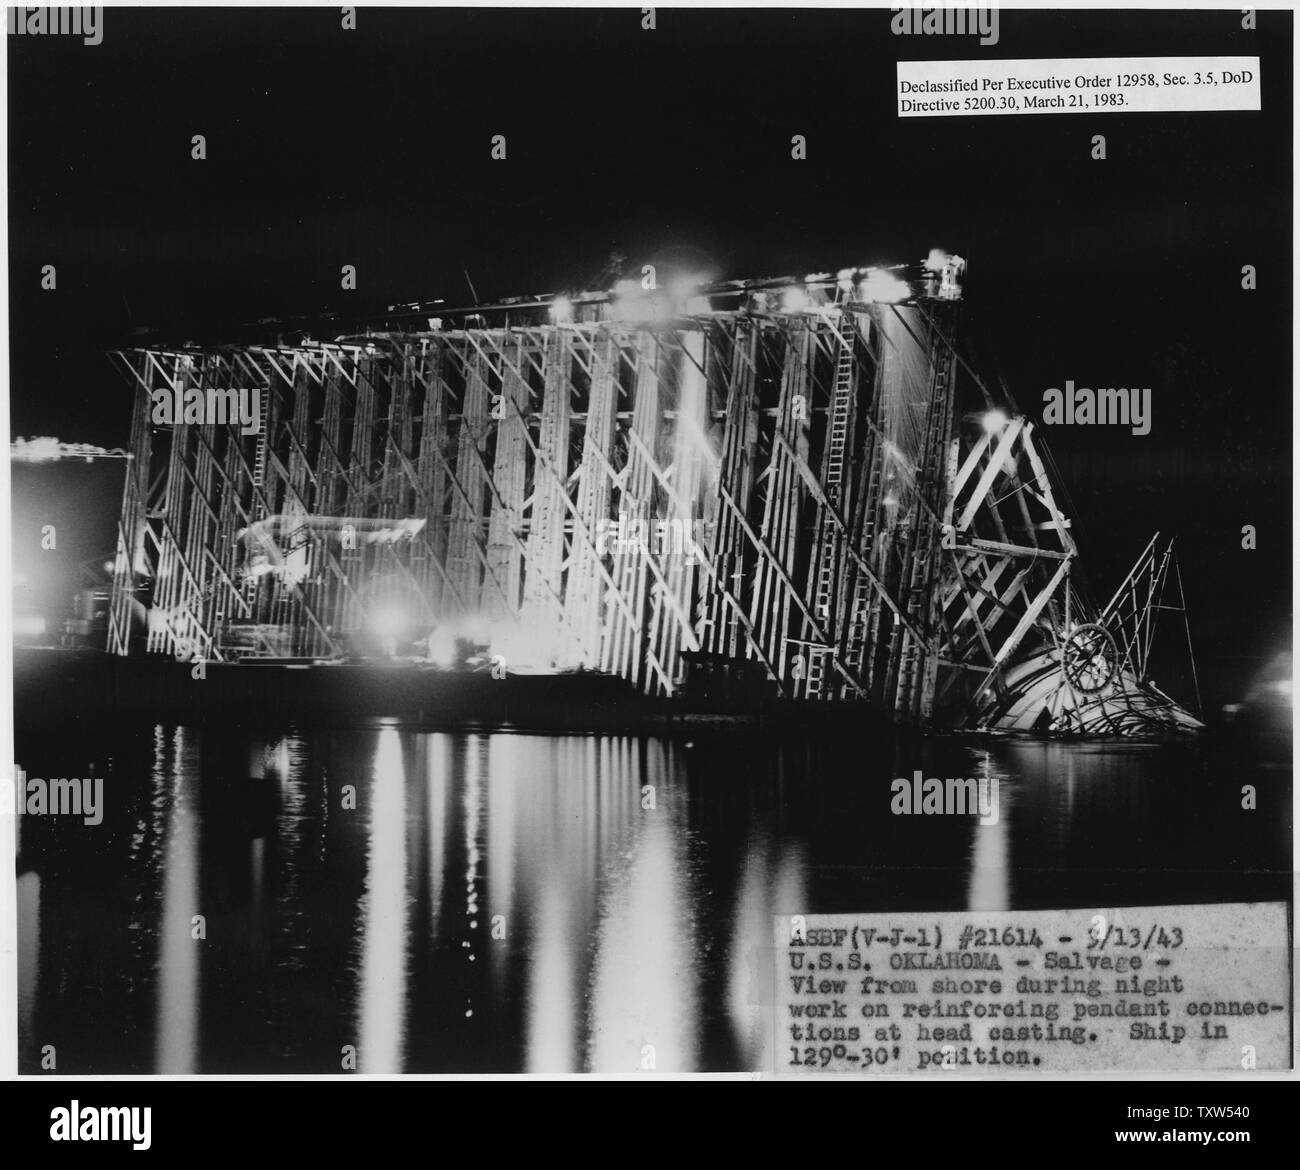 ASBF (V-J-1) #21614, 3/13/43; USS Oklahoma- Salvage- View from shore during night work on reinforcing pendant connections at head casting. Ship in 129 degees-30' position; Scope and content:  This is one of a collection of photographs of salvage operations at Pearl Harbor Naval Shipyard taken by the shipyard during the period following the Japanese attack on Pearl Harbor which initiated US participation in World War II. The photographs are found in a number of files in several shipyard records series. Stock Photo